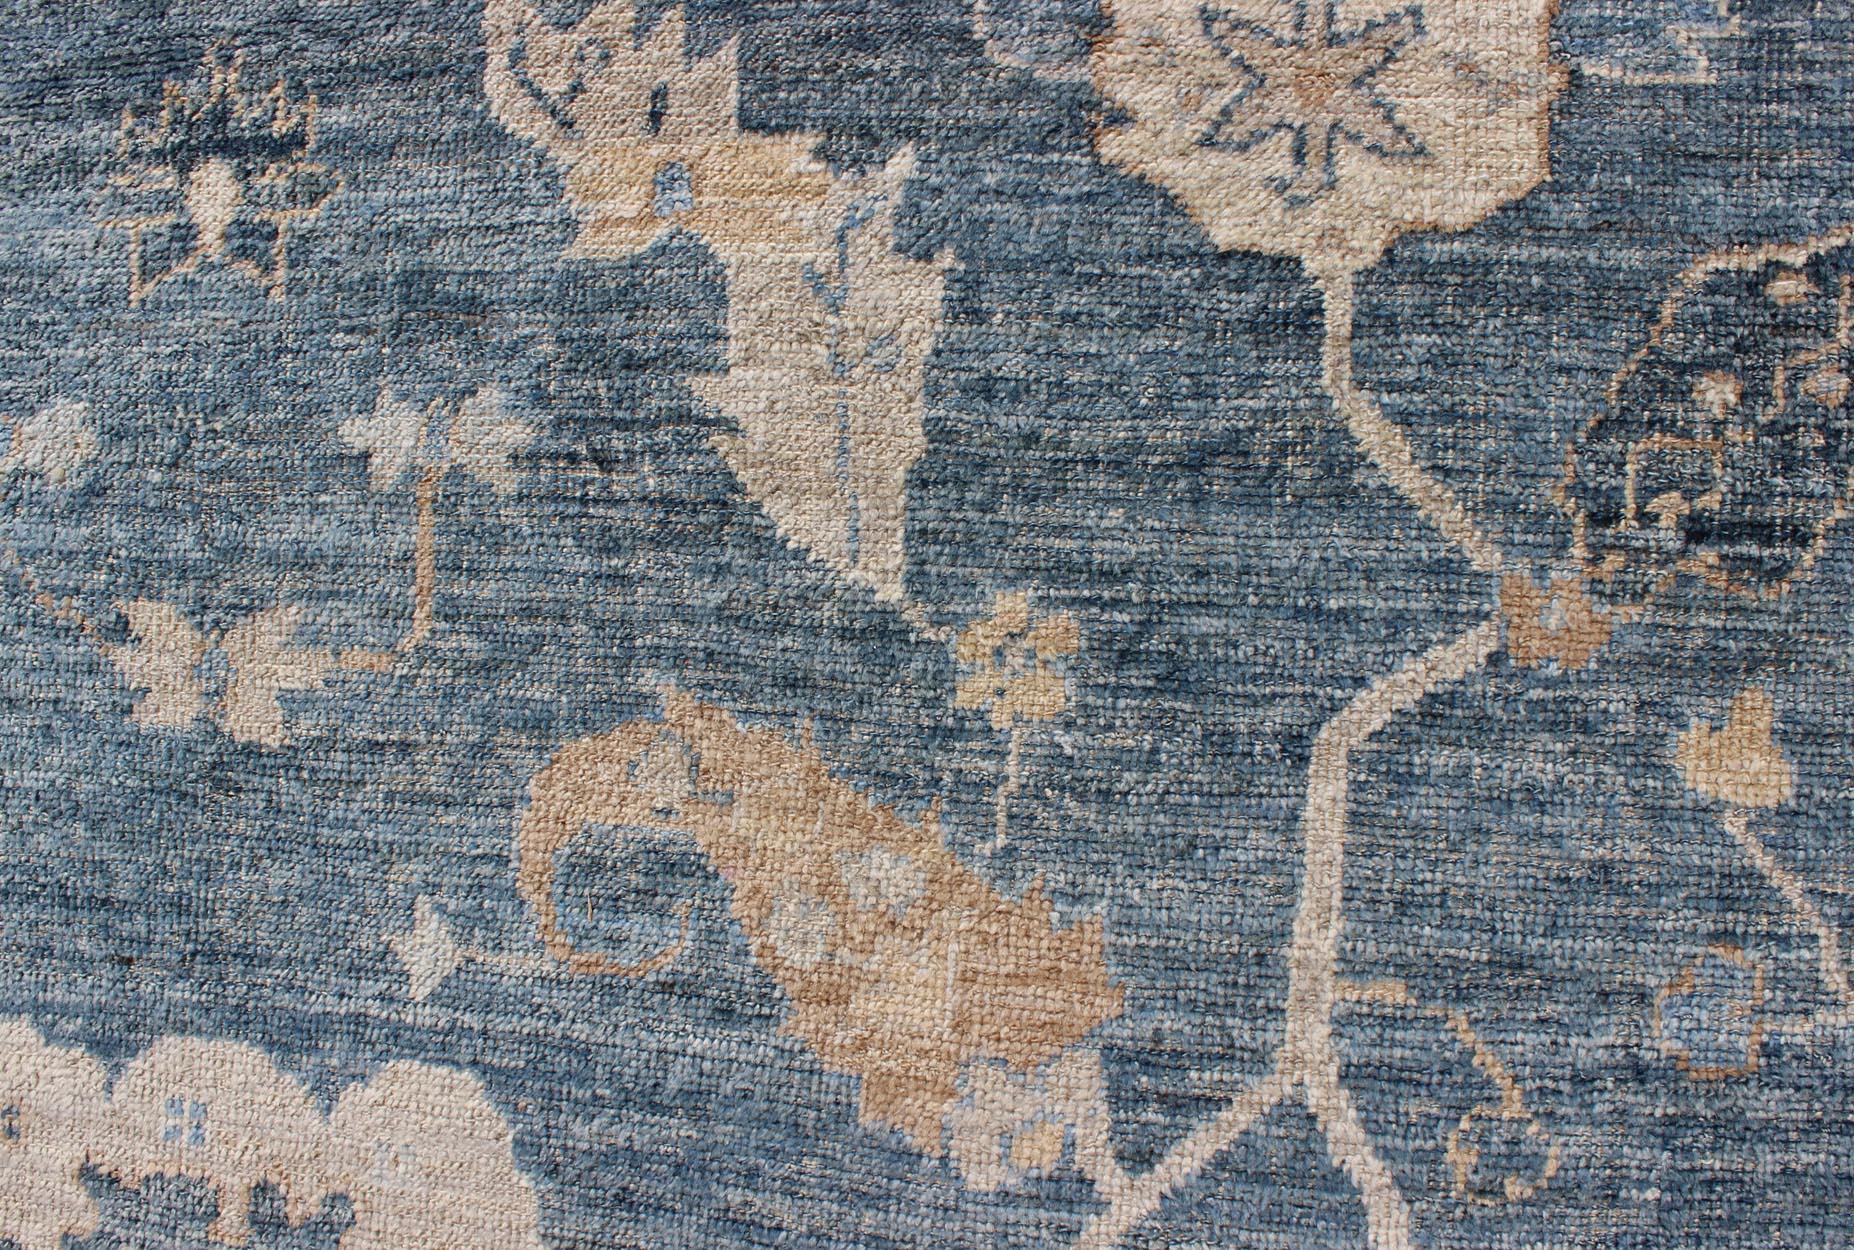 Angora Turkish Oushak Rug in Shades of Blue and Tan 5